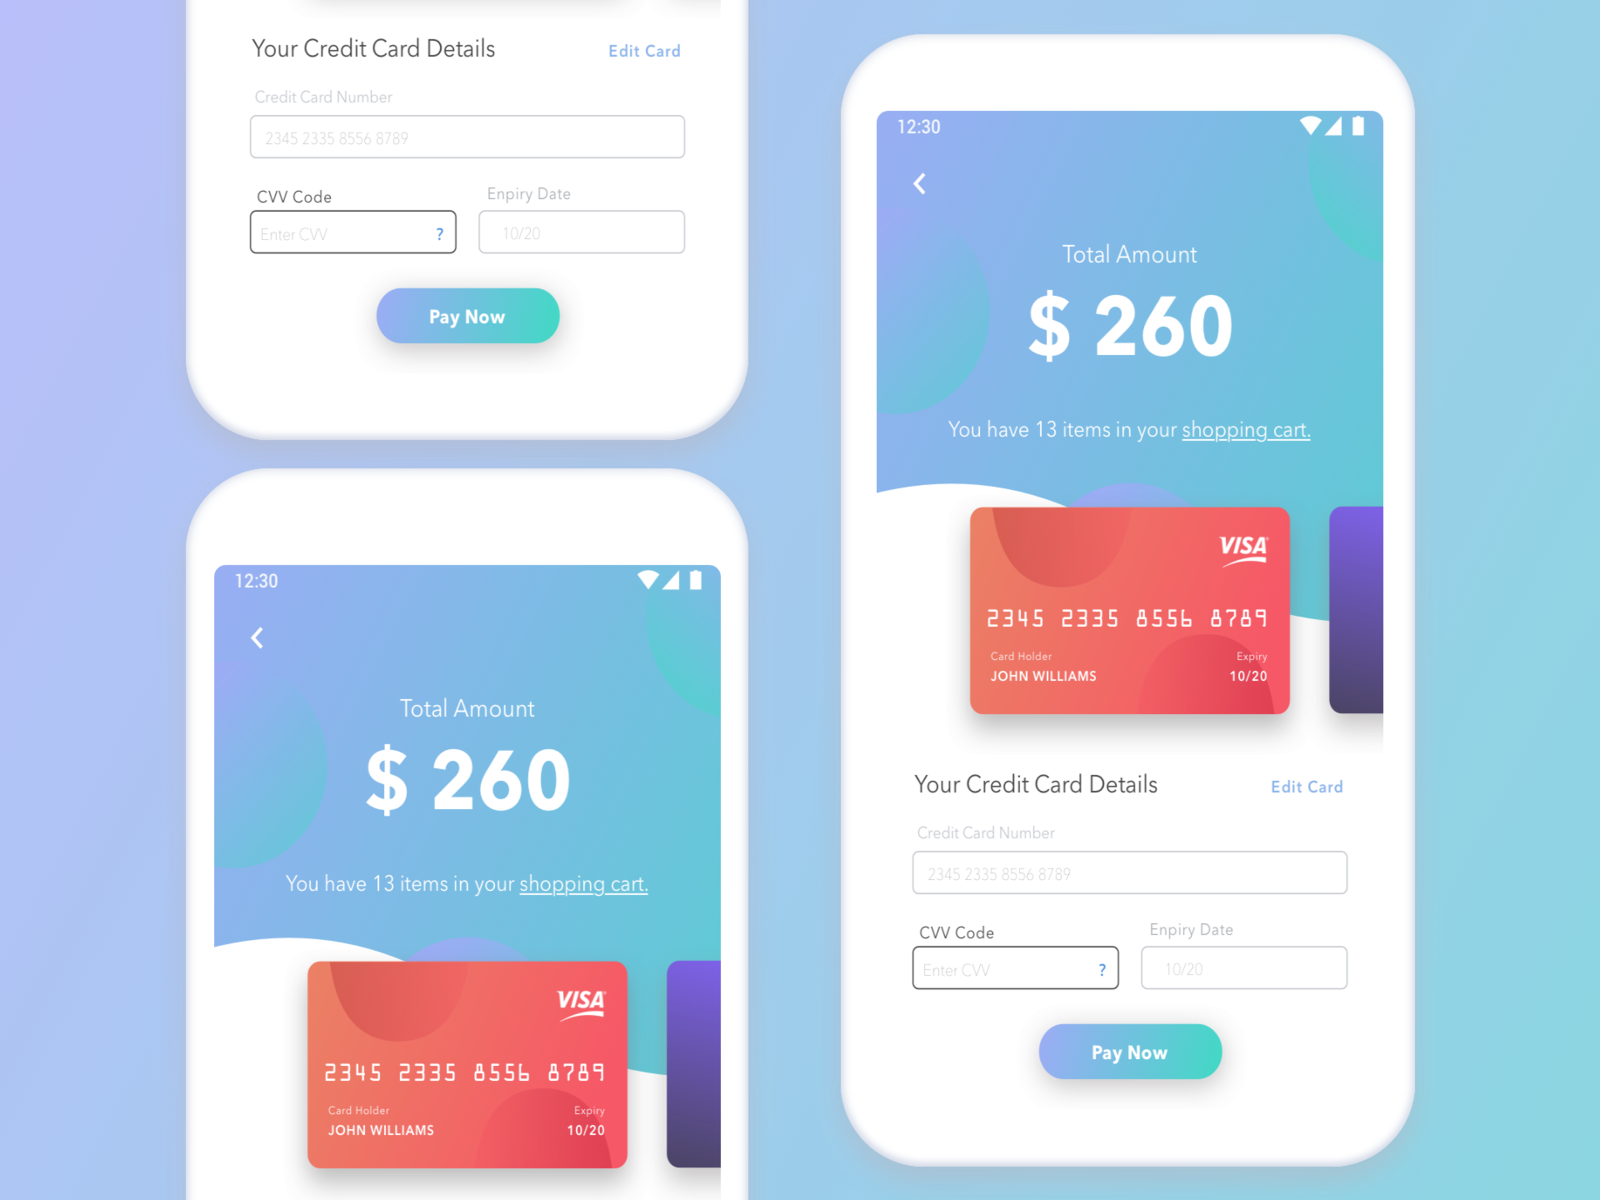 Pay by card. Payment Card. Credit Card редактировать. Payment Page UI. Payment Card Design.